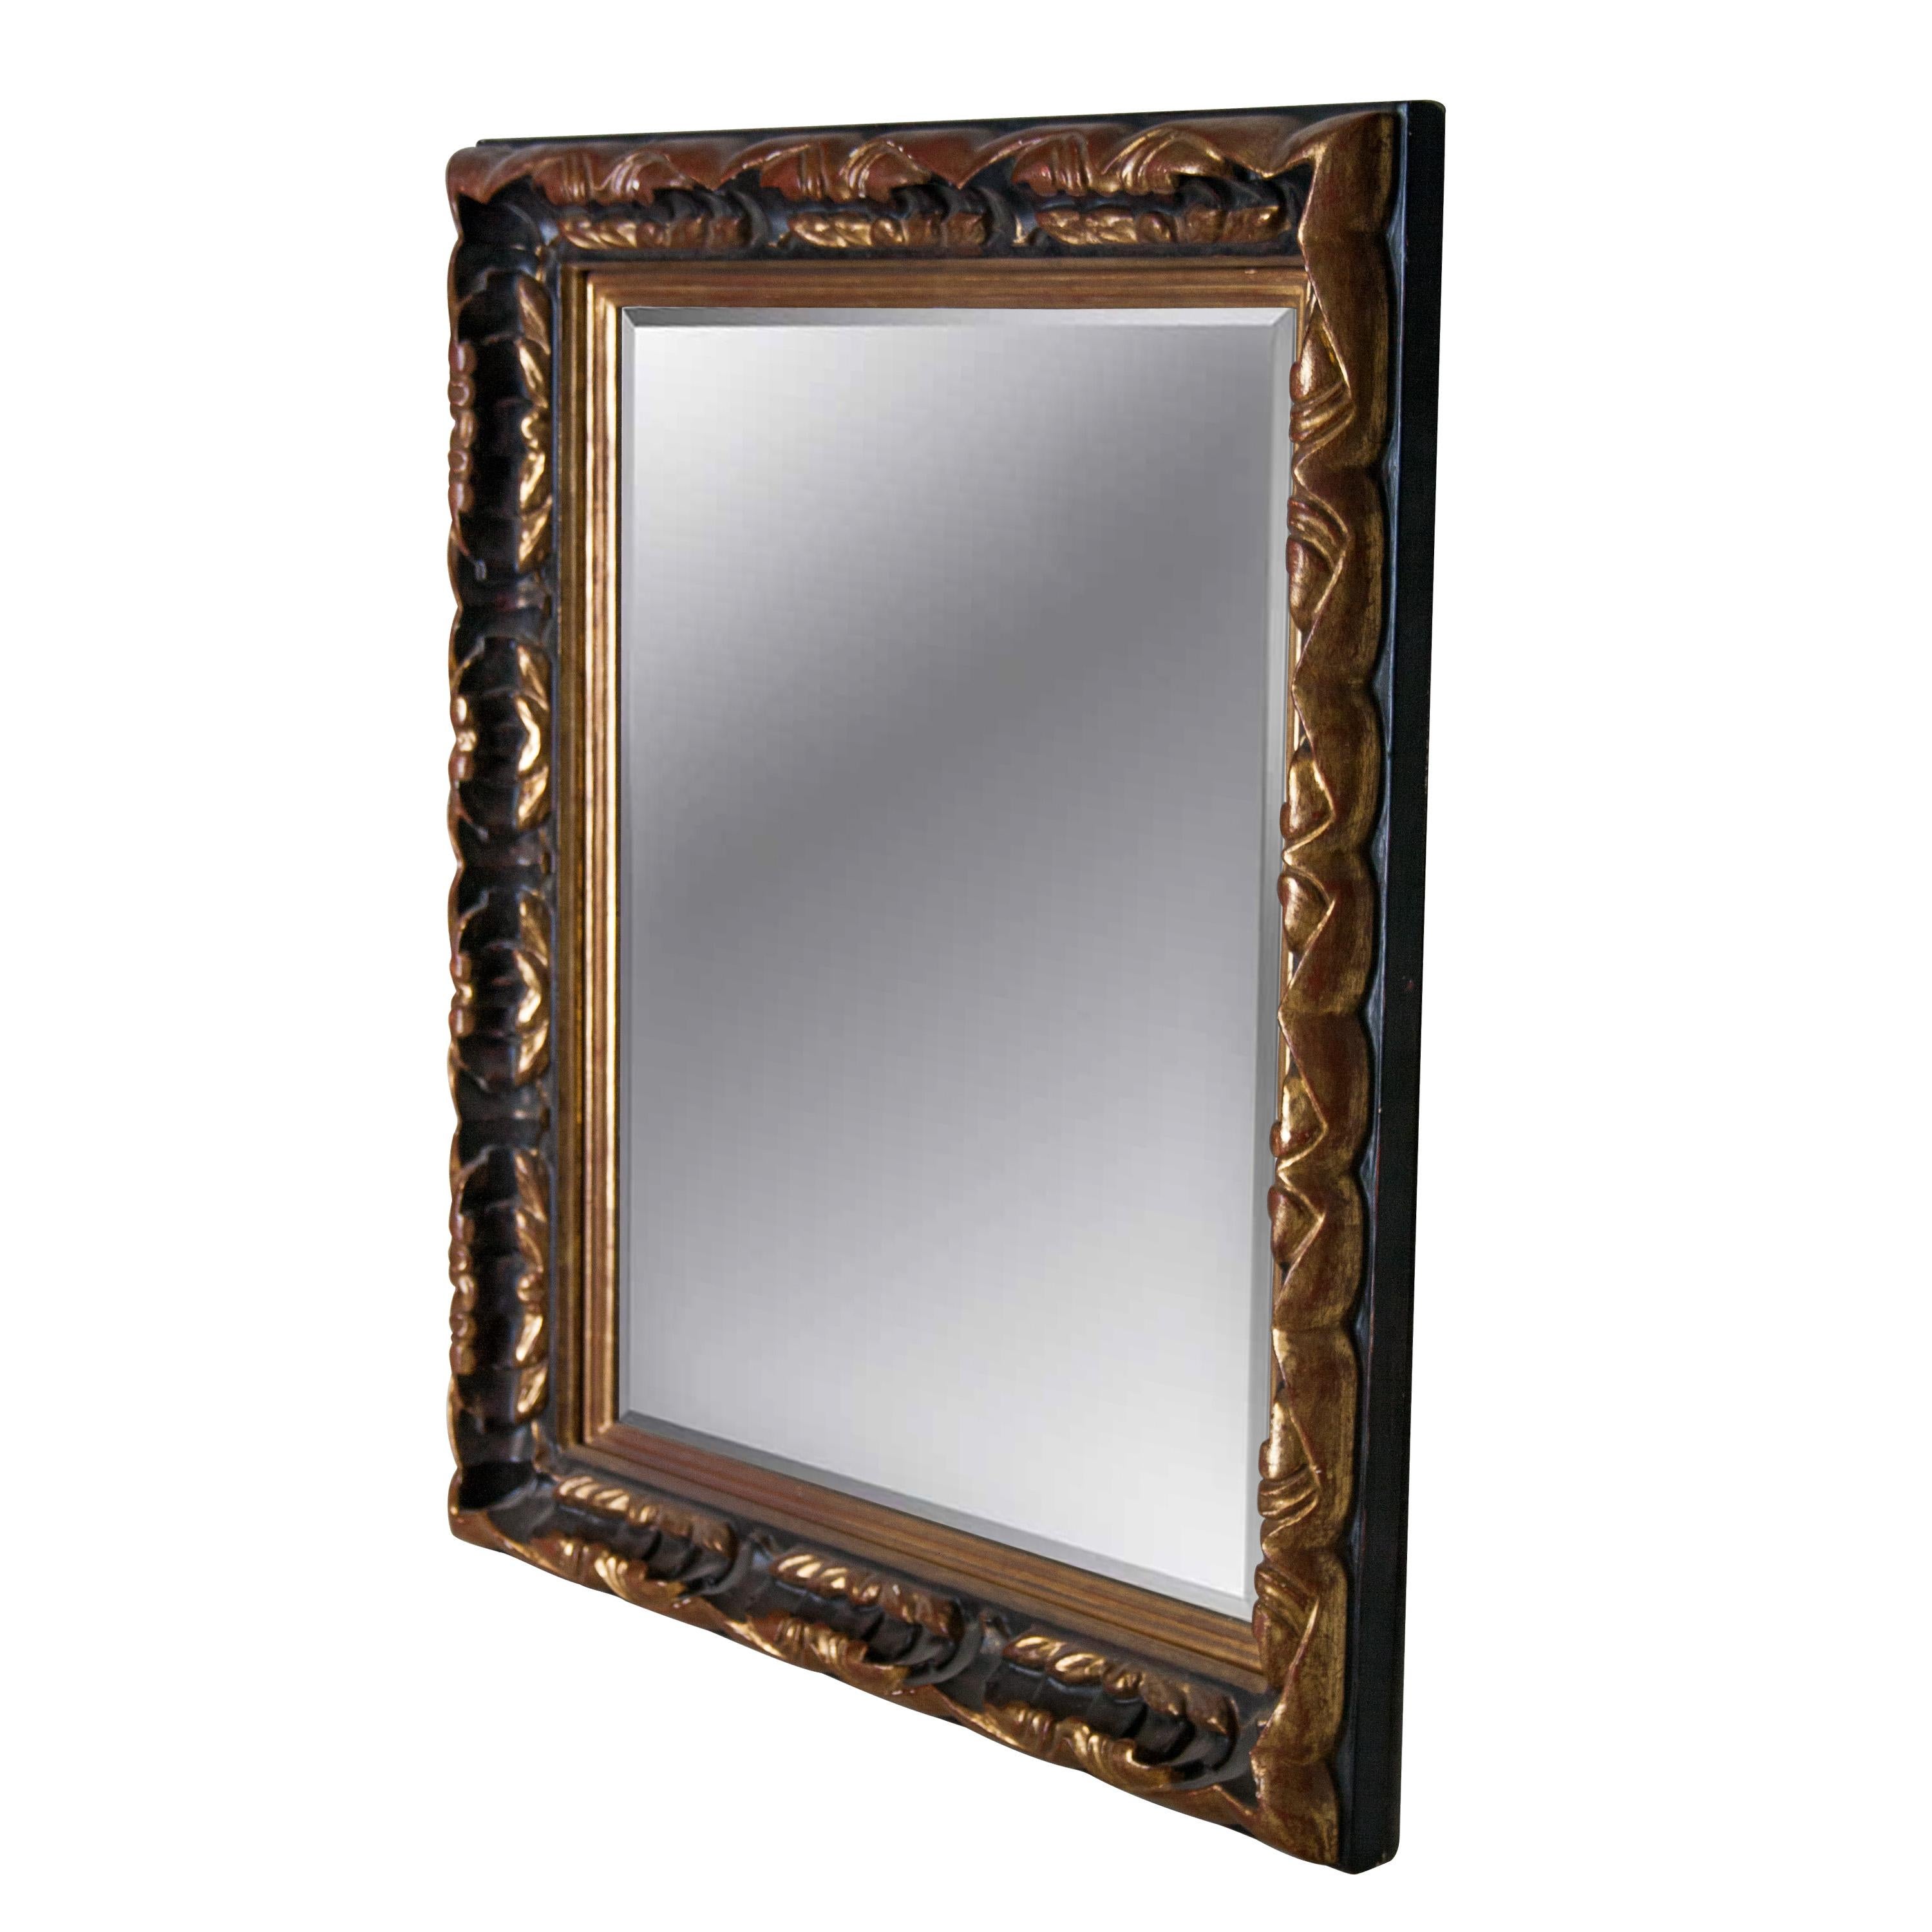 Neoclassical Empire style handcrafted mirror. Rectangular hand carved wooden structure with gold foiled and black finish. Spain, 1970.